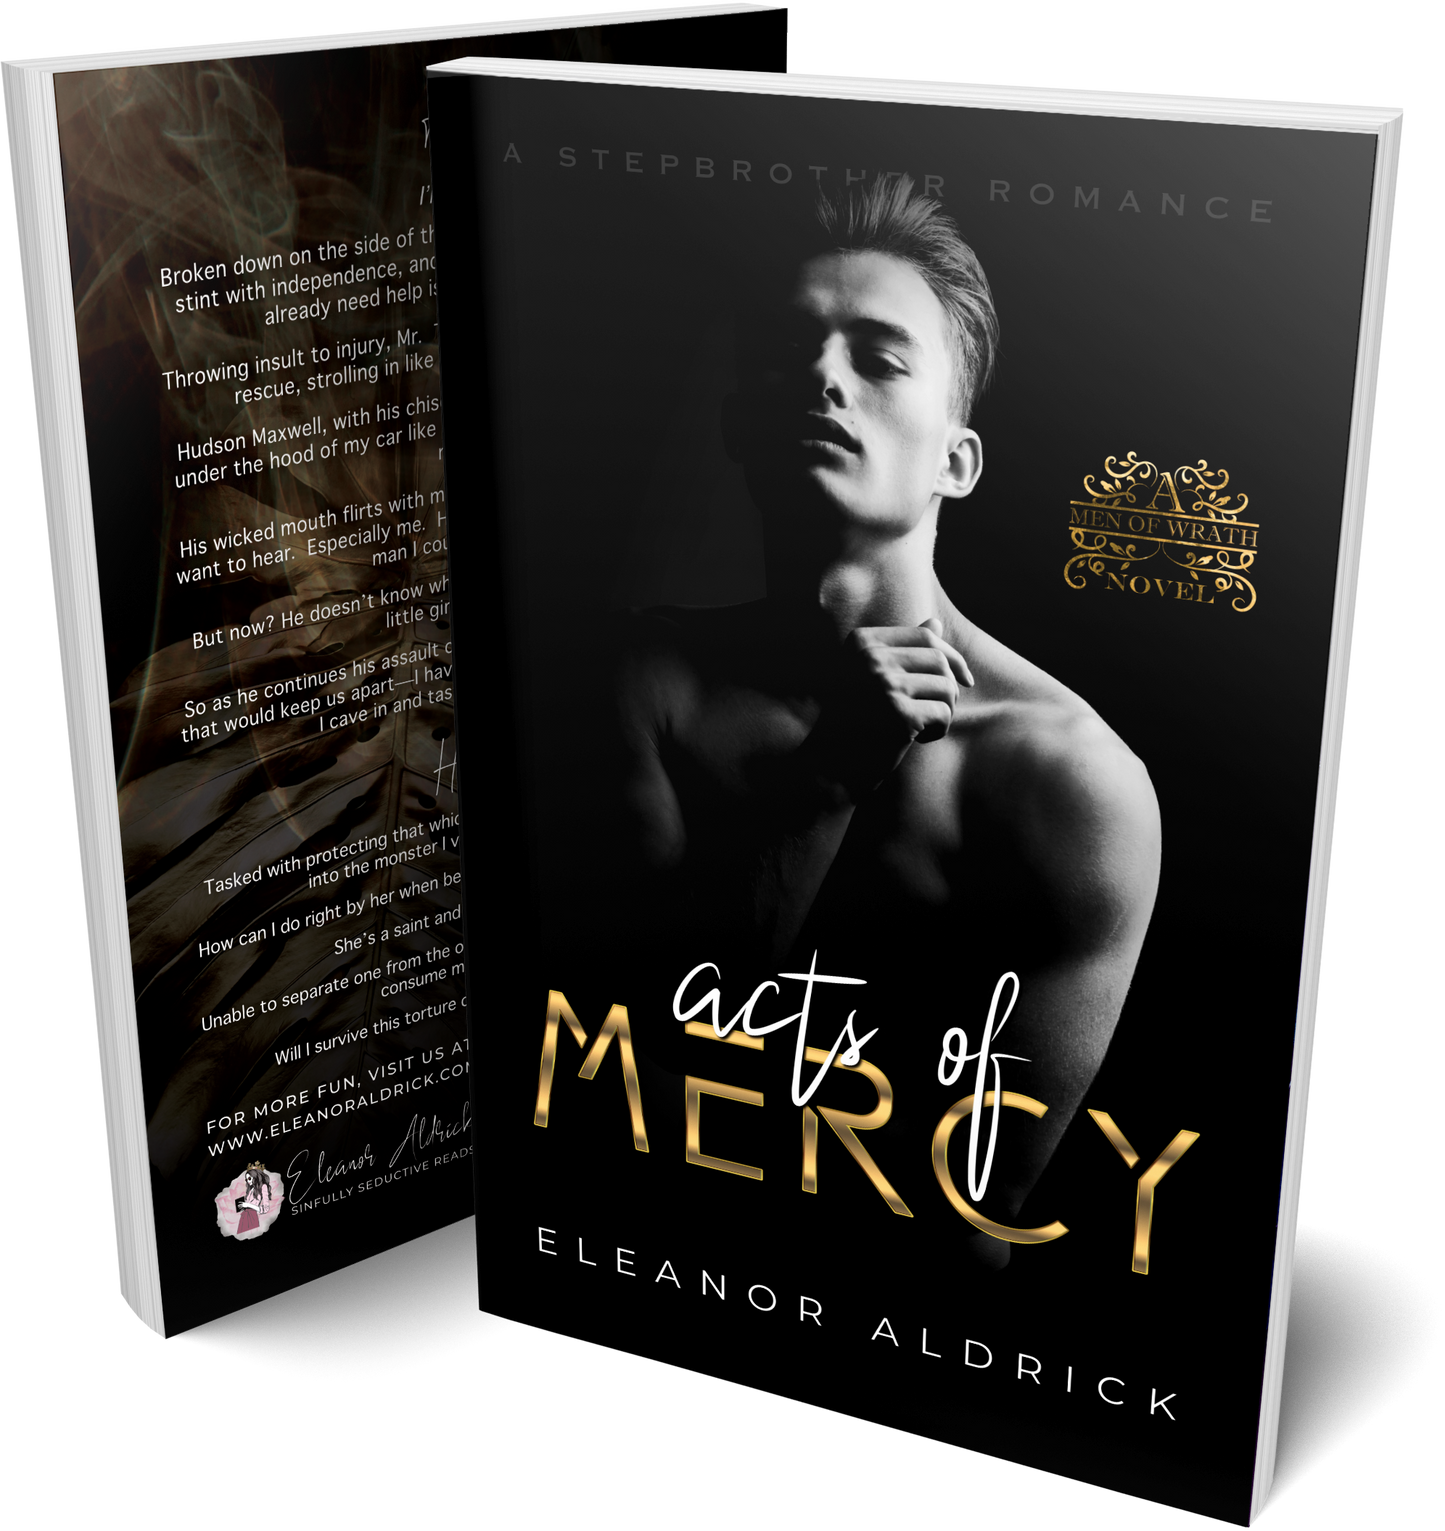 Acts of Mercy: A Stepbrother Romance (Men of WRATH)